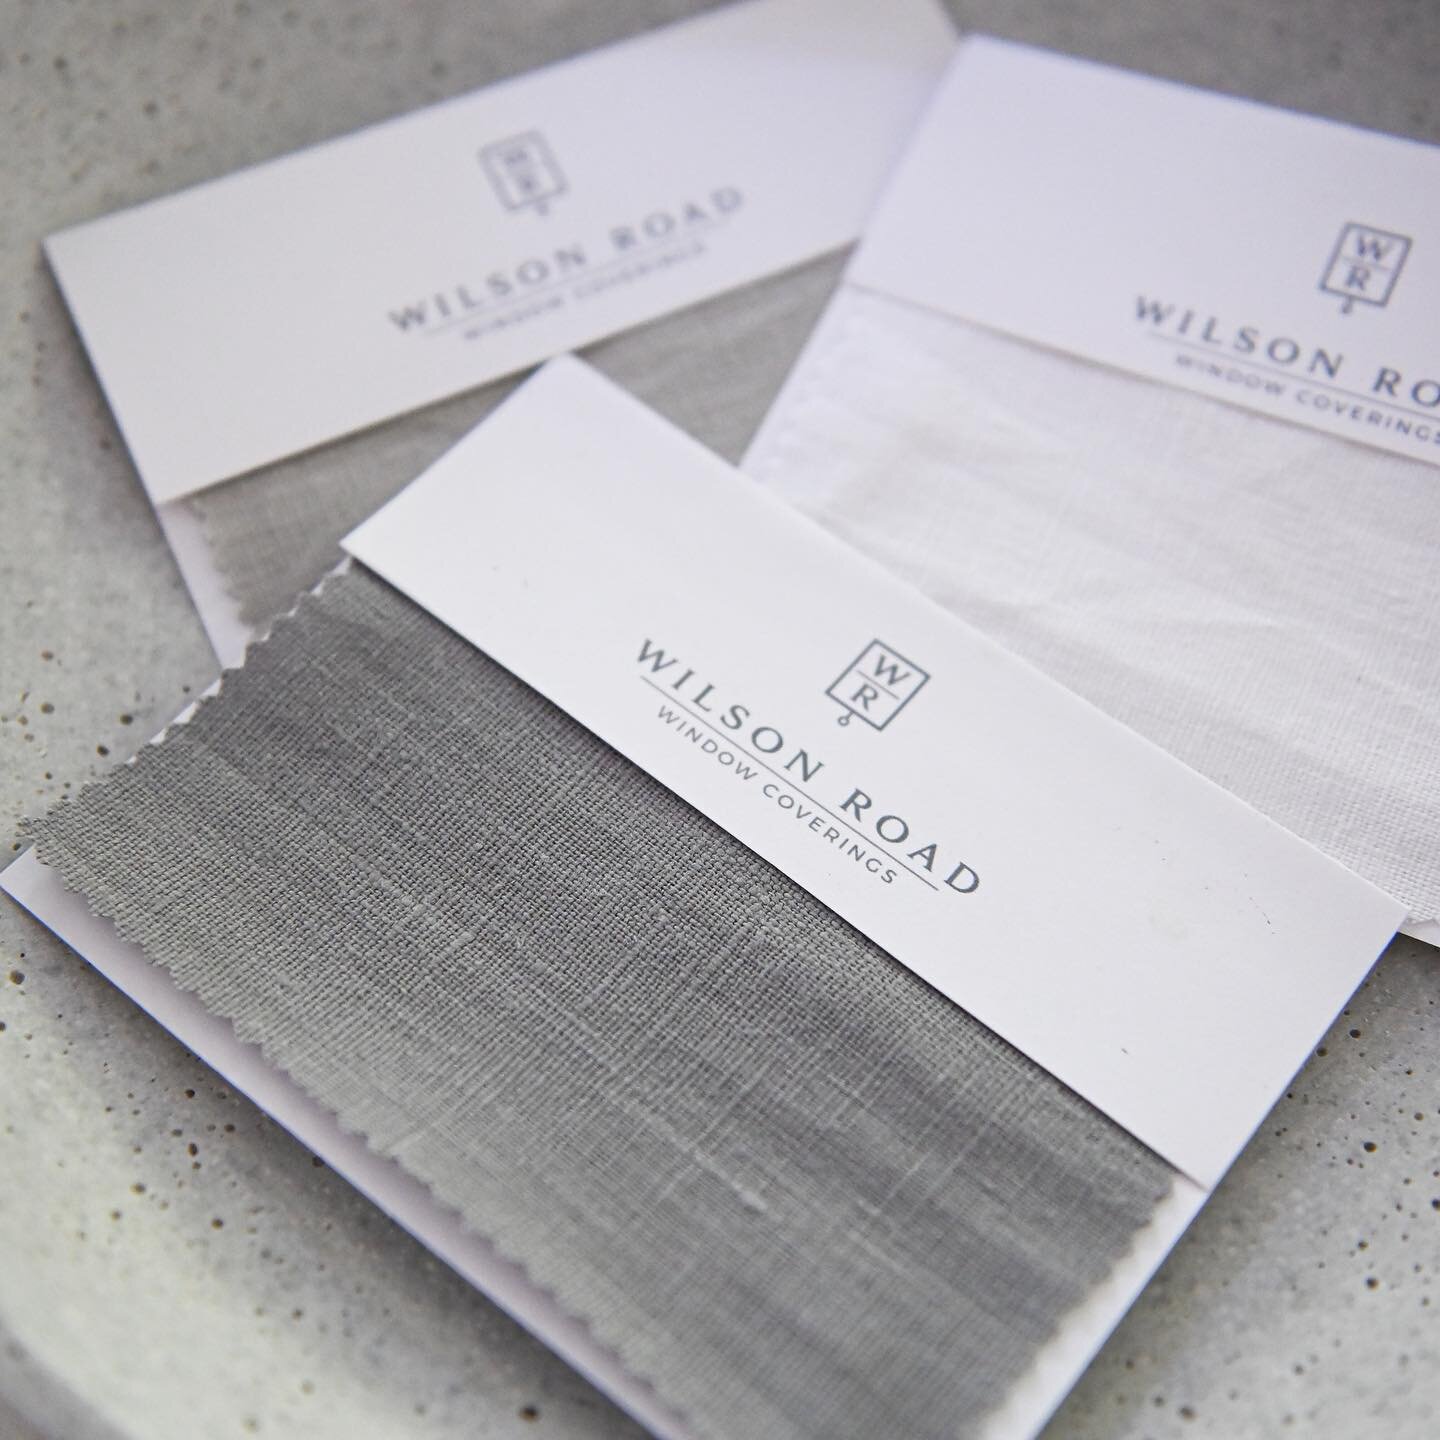 Let us help you find the perfect fabric for your drapes, shades or blinds. 

#wilsondressedwindows
#linenshades
#linendrapes